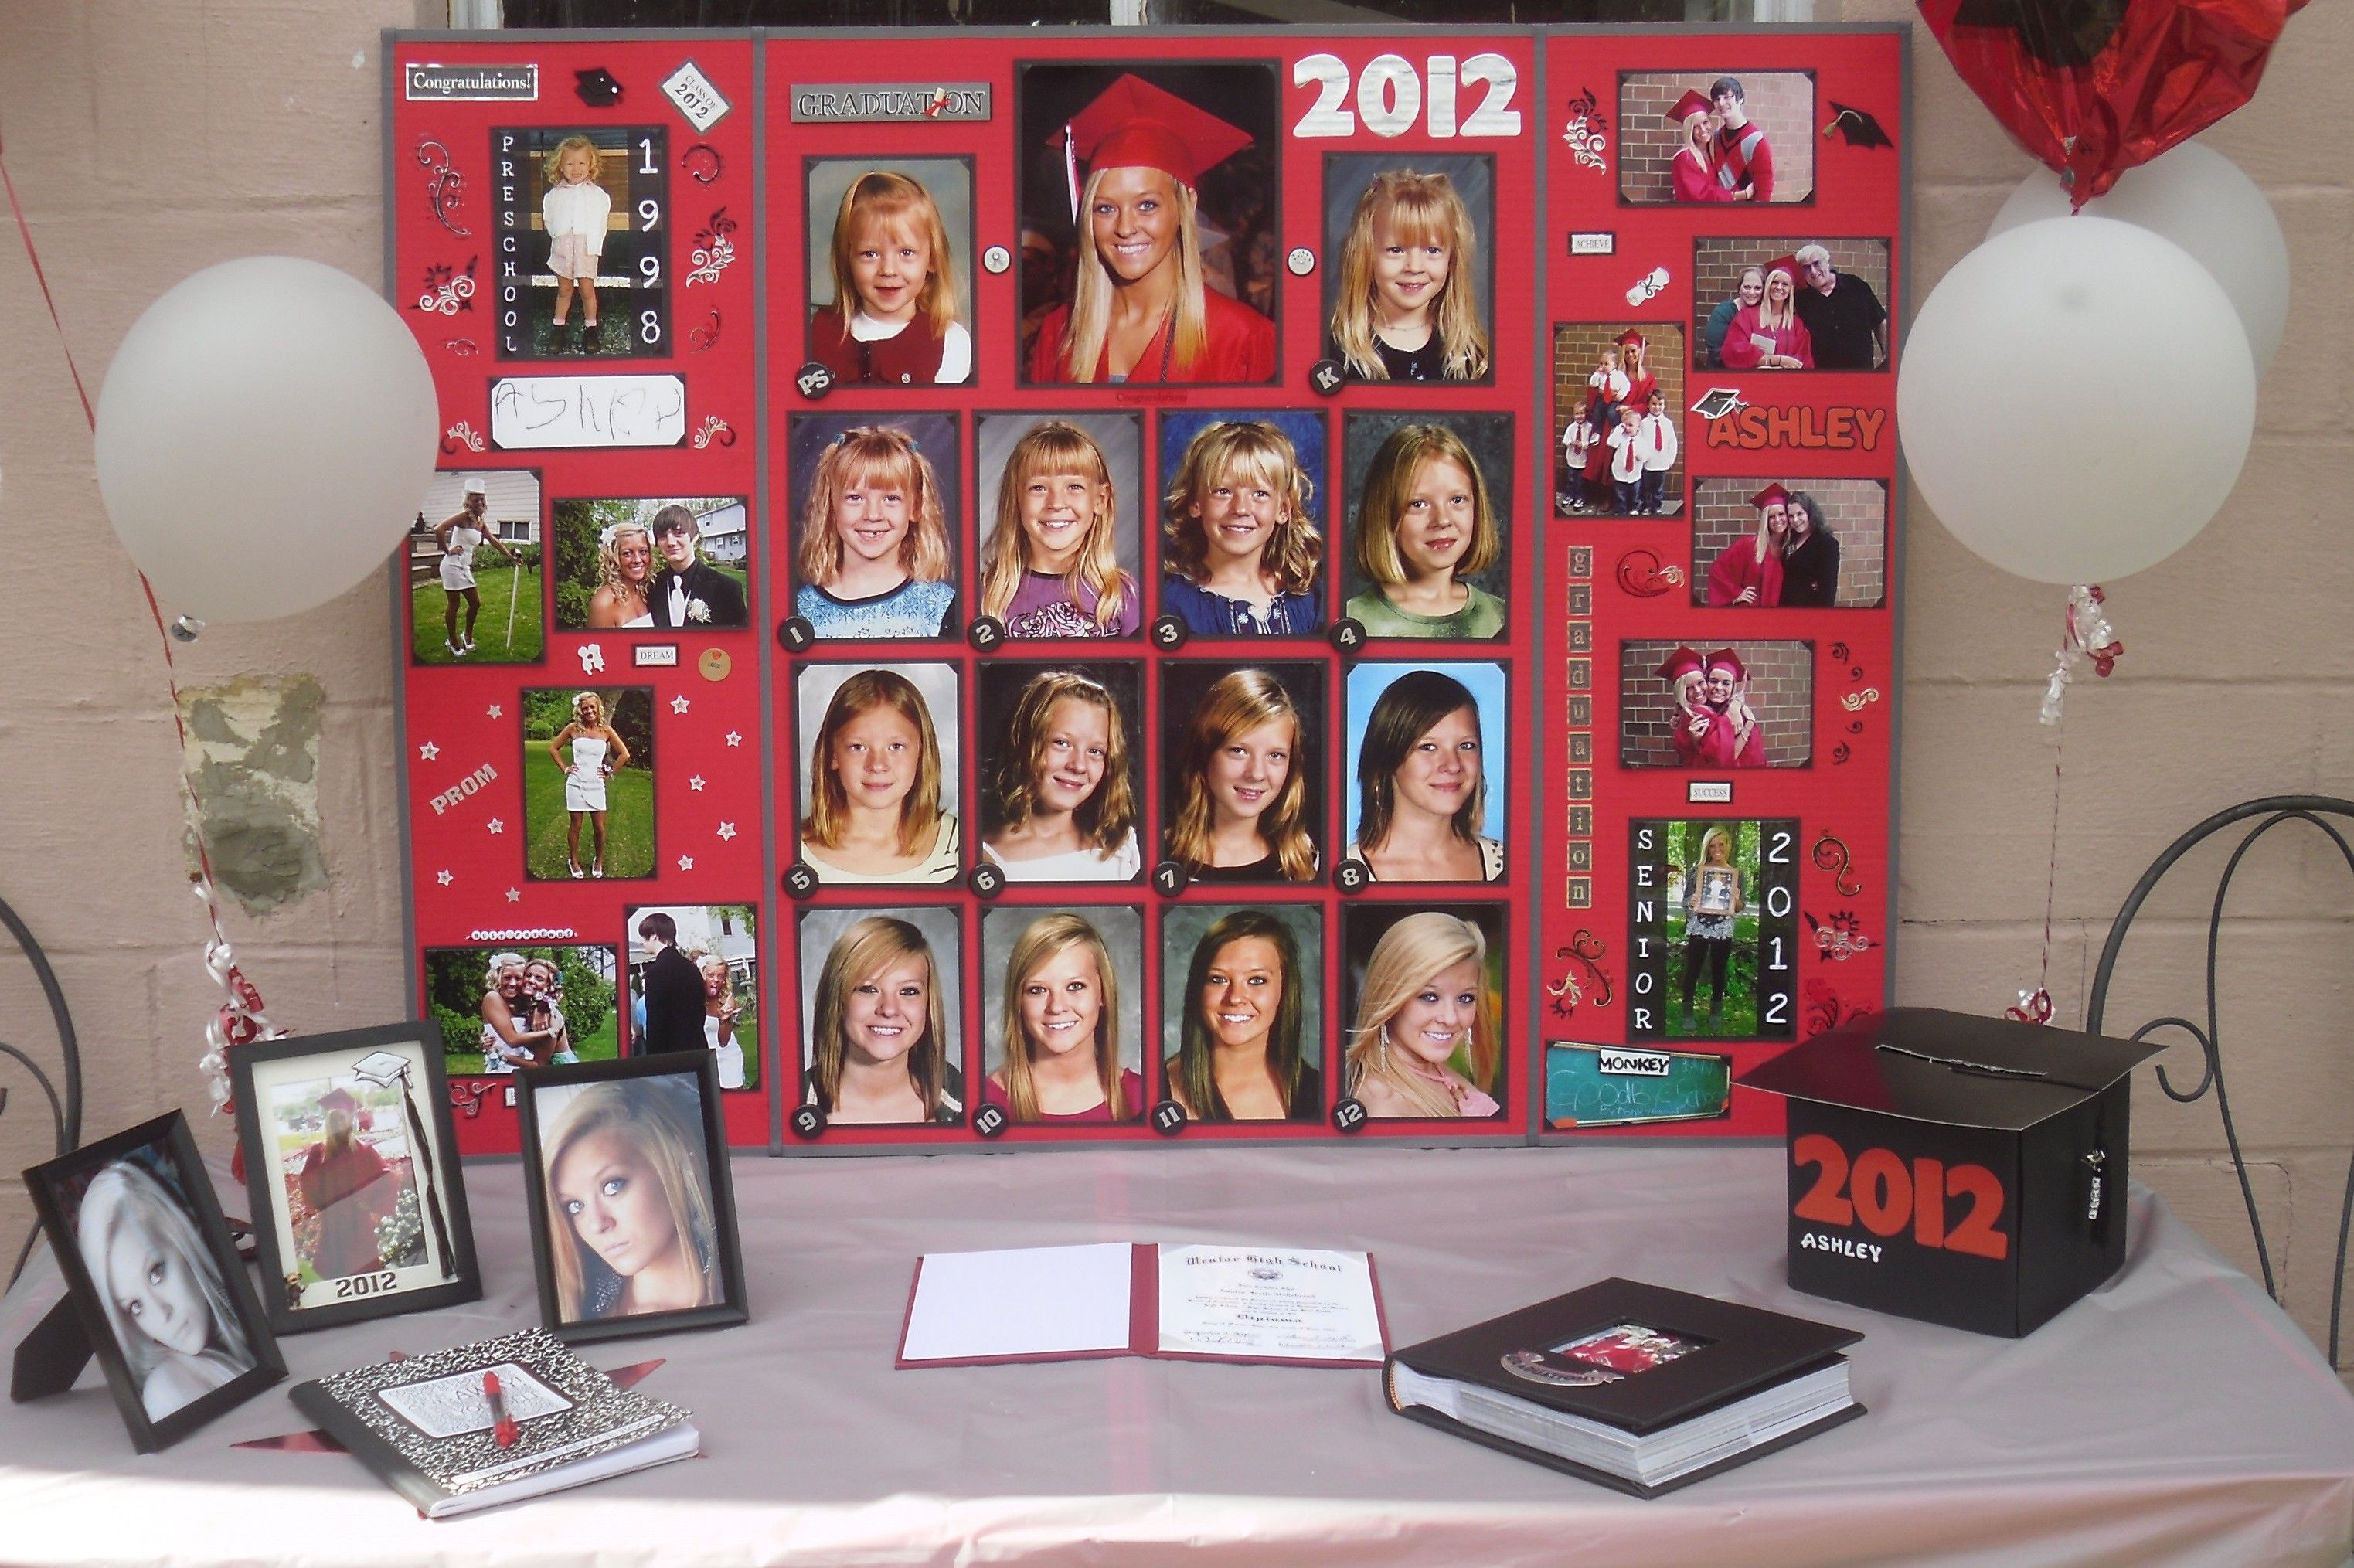 Graduation Party Picture Display Ideas
 Graduation Display Poster Party Ideas